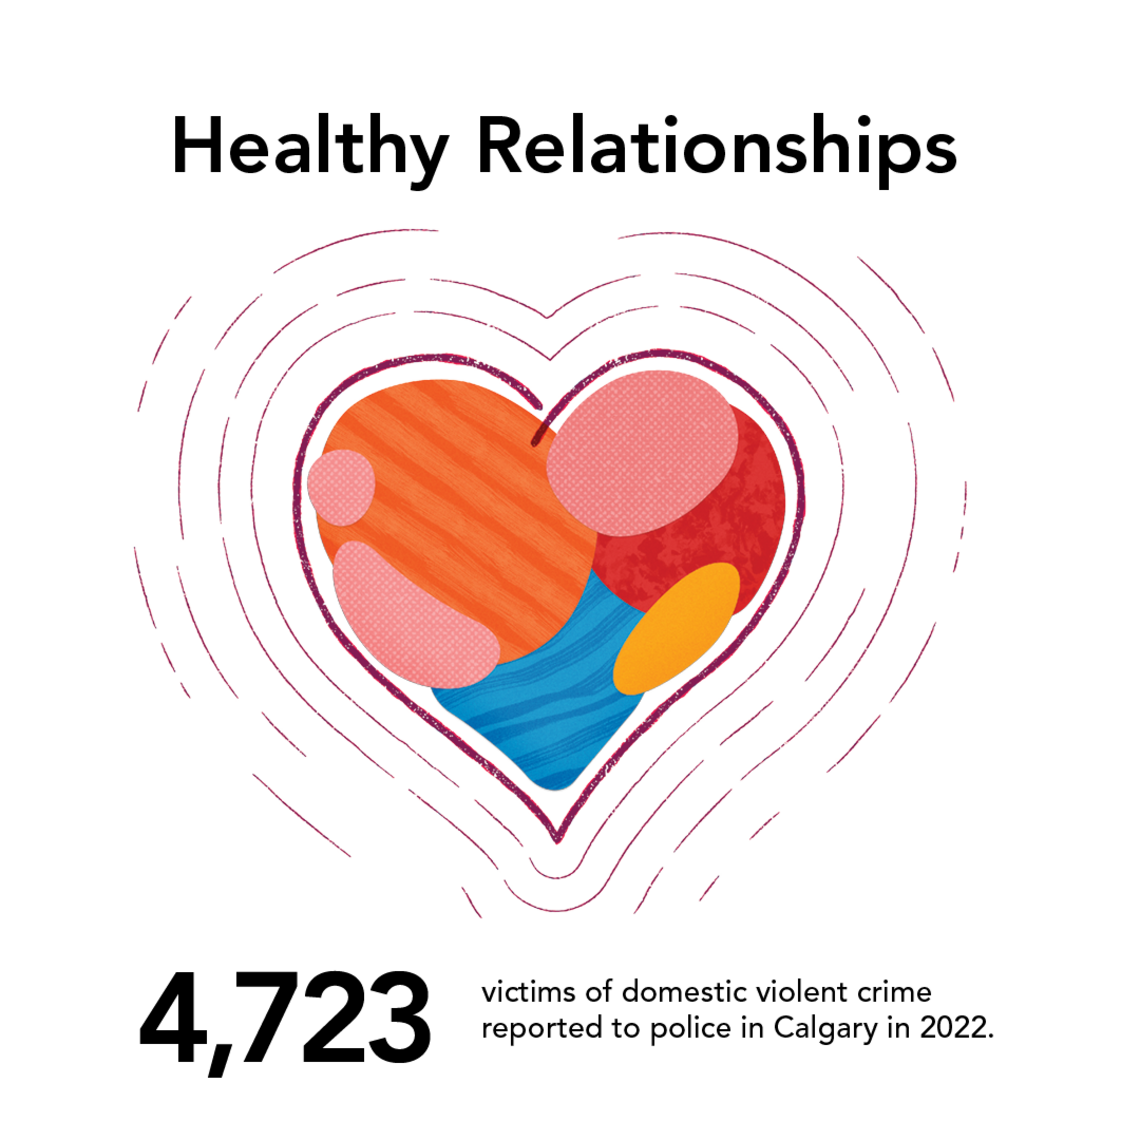 A graphic with a colourful heart shape. The text reads "Healthy Relationships: 4,723 victims of domestic violent crime reported to police in Calgary in 2022."